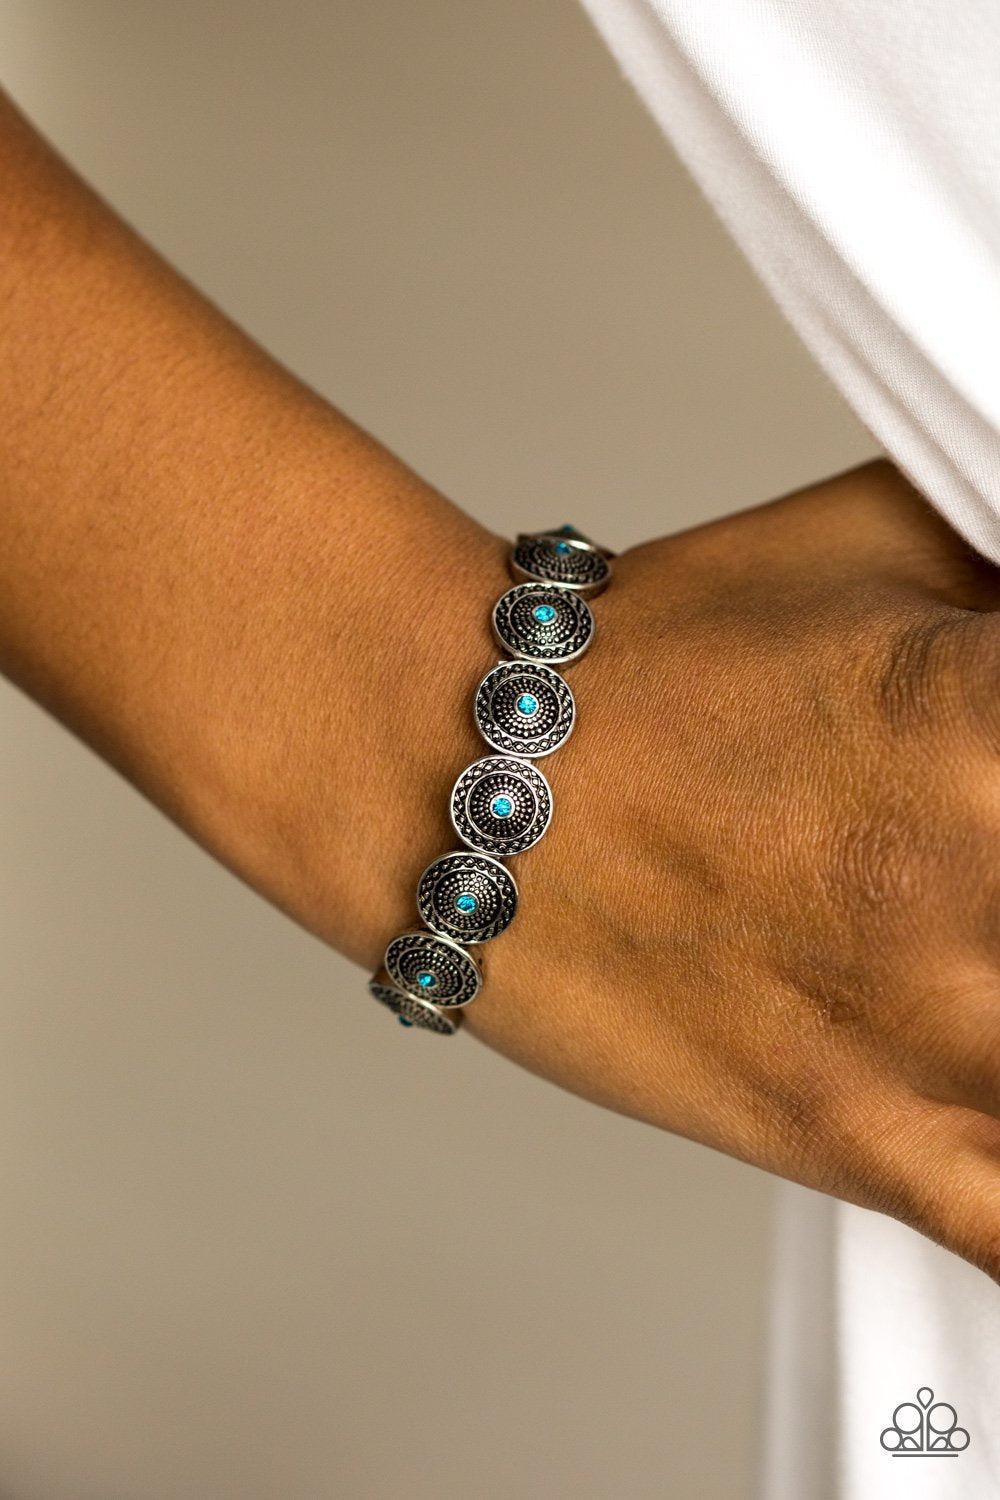 Get Your Shine On Silver and Blue Gem Bracelet - Paparazzi Accessories-CarasShop.com - $5 Jewelry by Cara Jewels